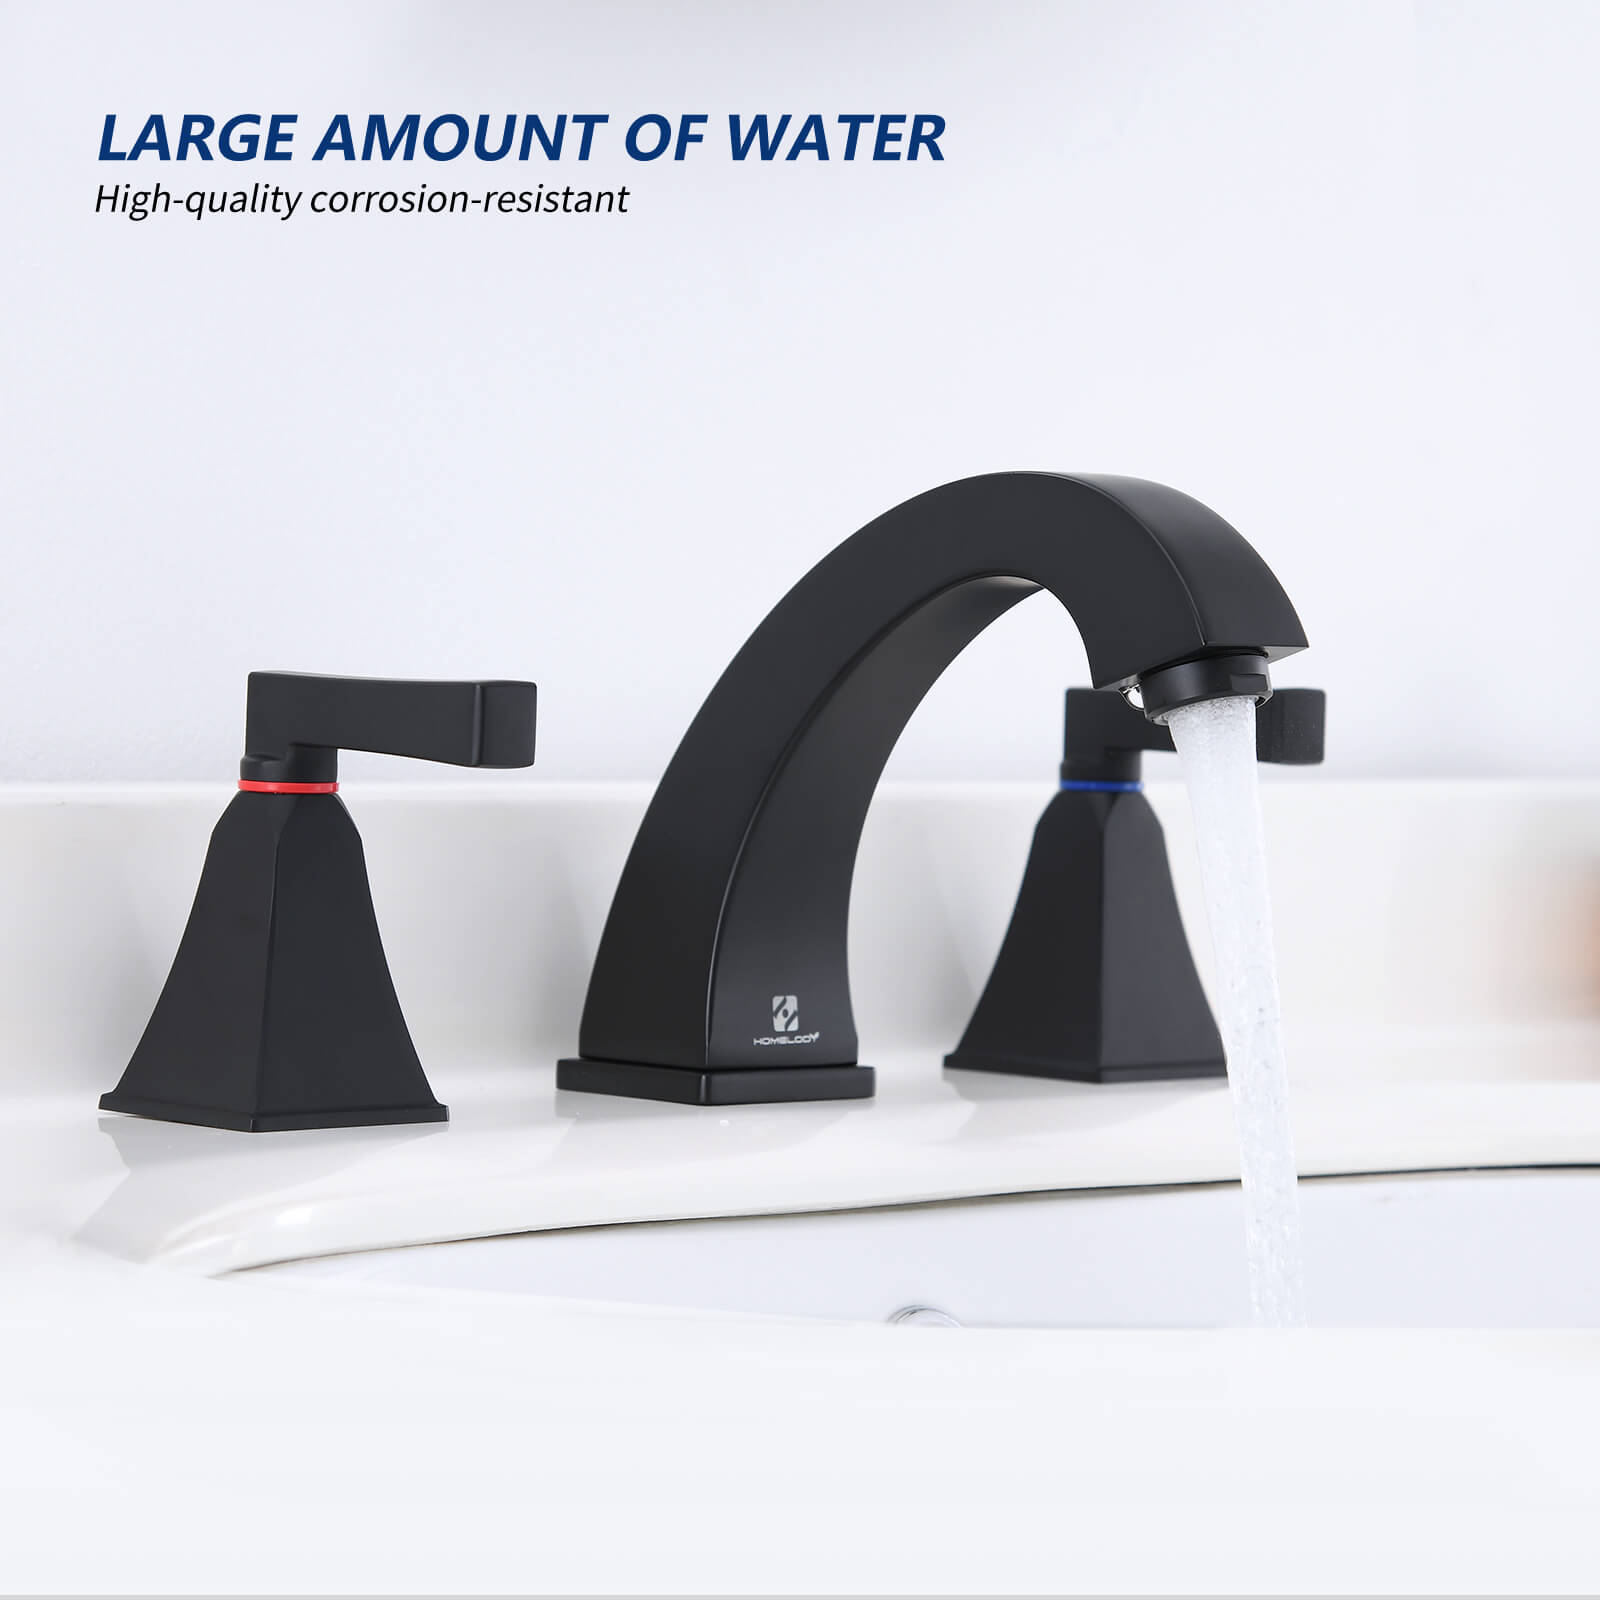 HOMELODY 8 Inch 2 Handle Bathroom Sink Faucet for 3 Hole